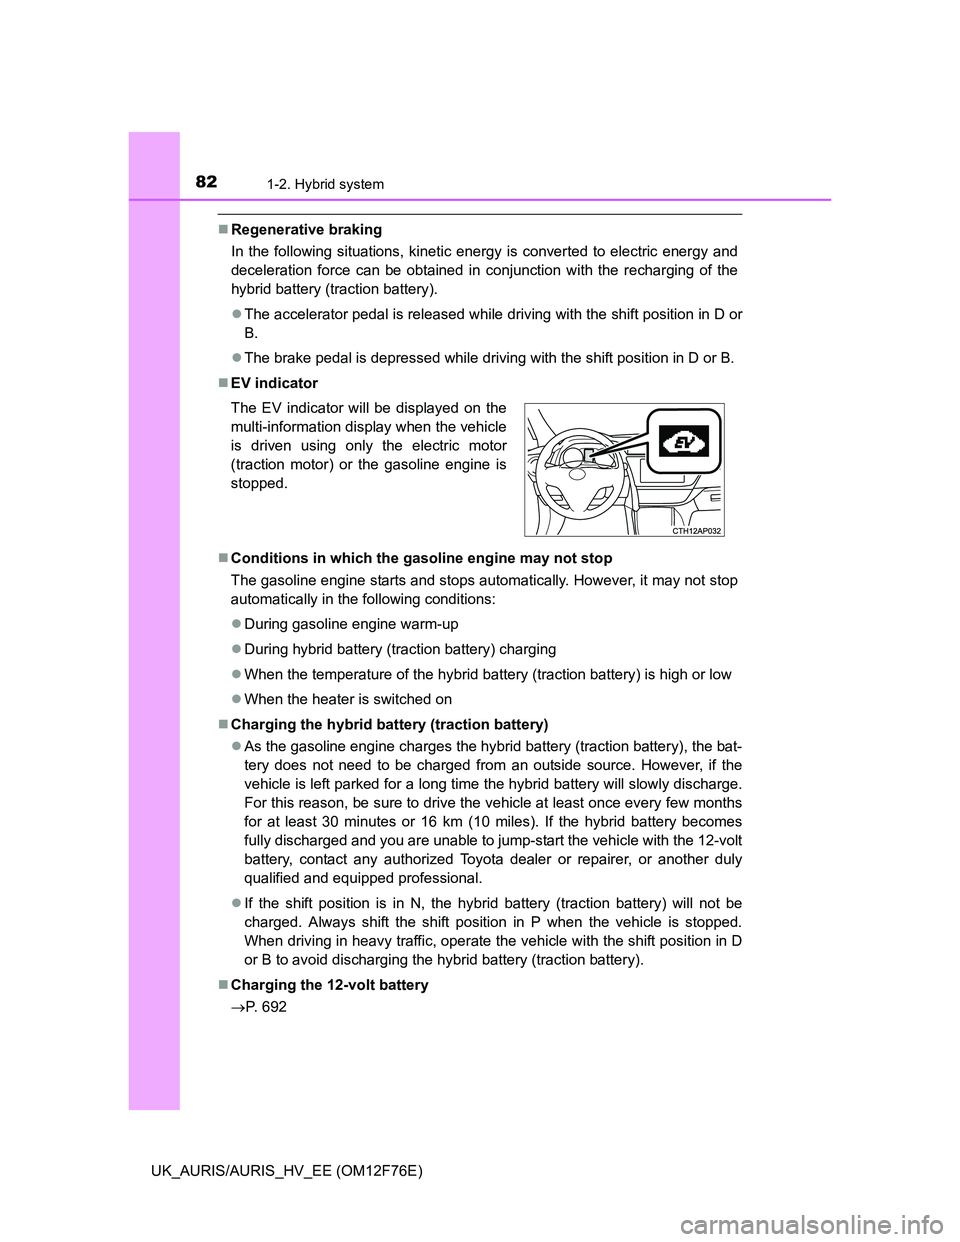 TOYOTA AURIS 2013  Owners Manual (in English) 821-2. Hybrid system
UK_AURIS/AURIS_HV_EE (OM12F76E)
Regenerative braking
In the following situations, kinetic energy is converted to electric energy and
deceleration force can be obtained in conju